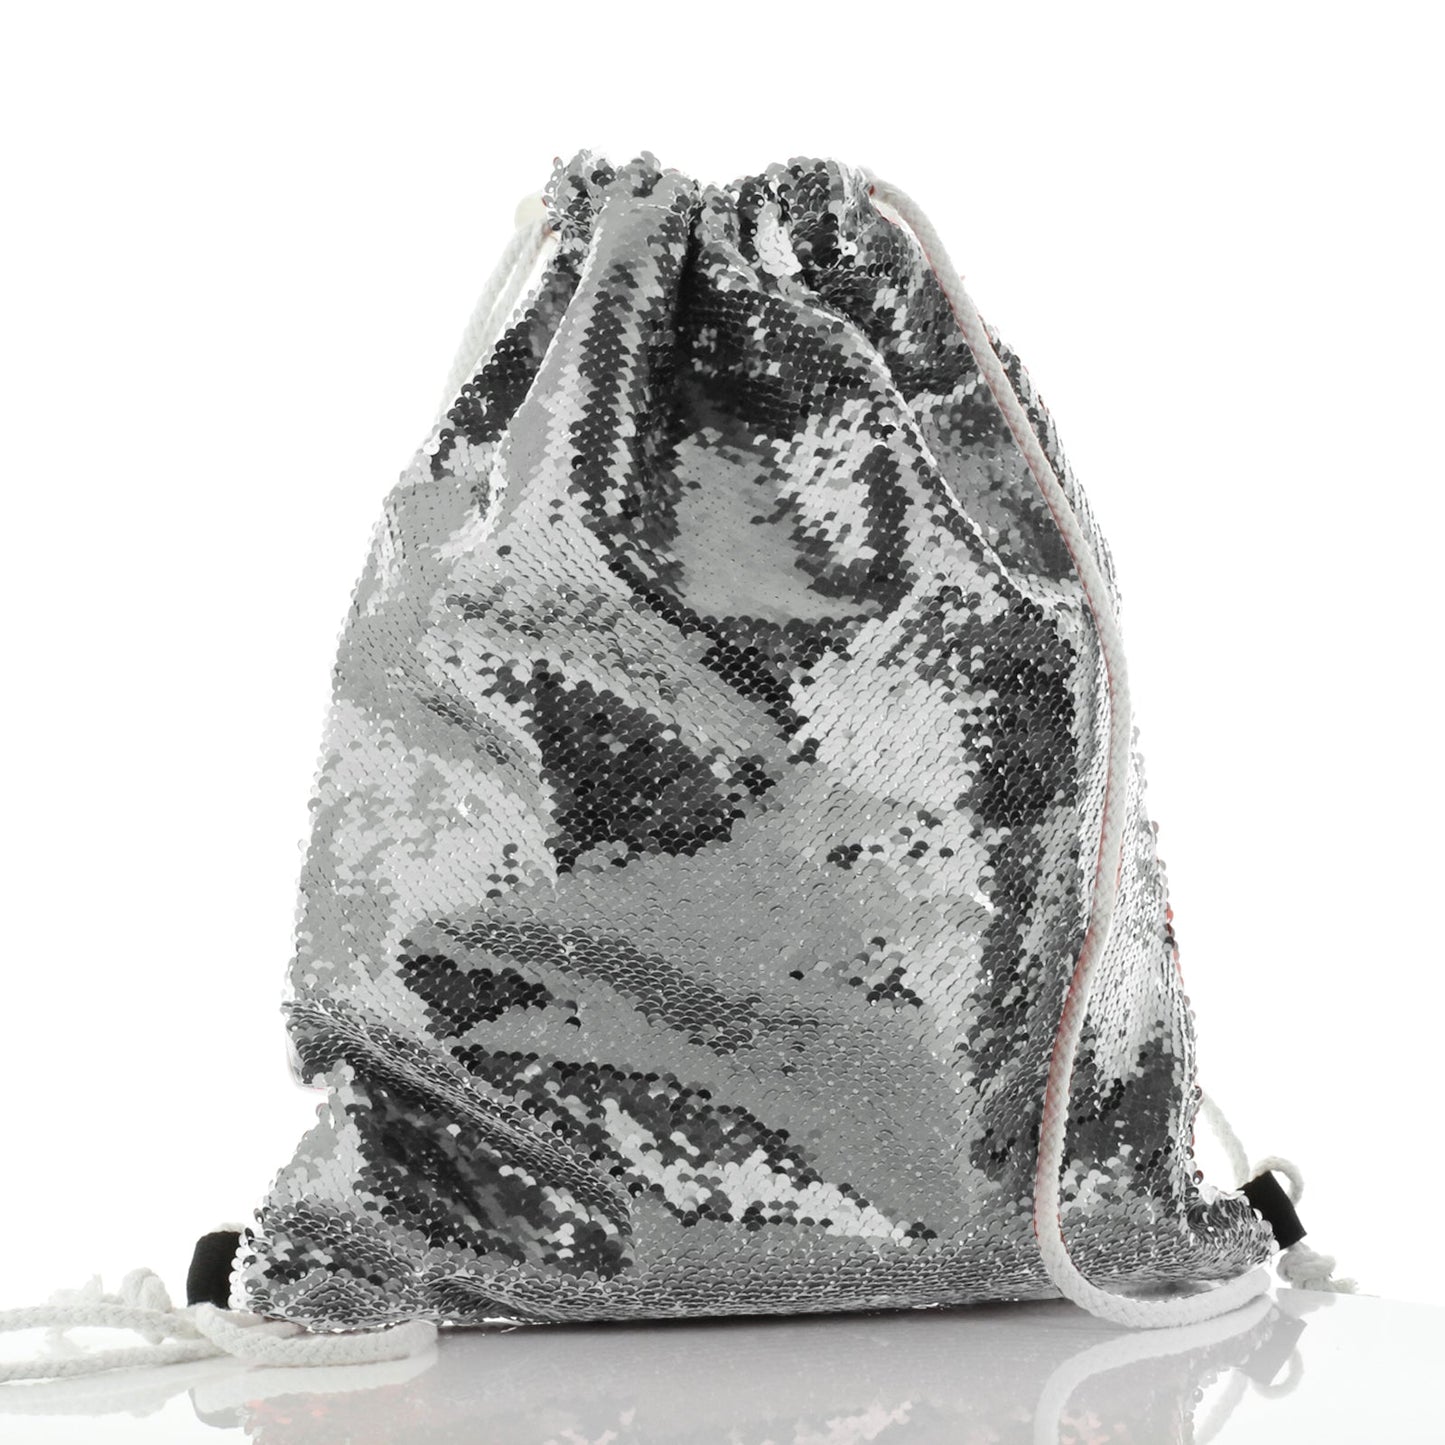 Personalised Sequin Drawstring Backpack with Welcoming Text and Relaxing Mum and Baby Hippos